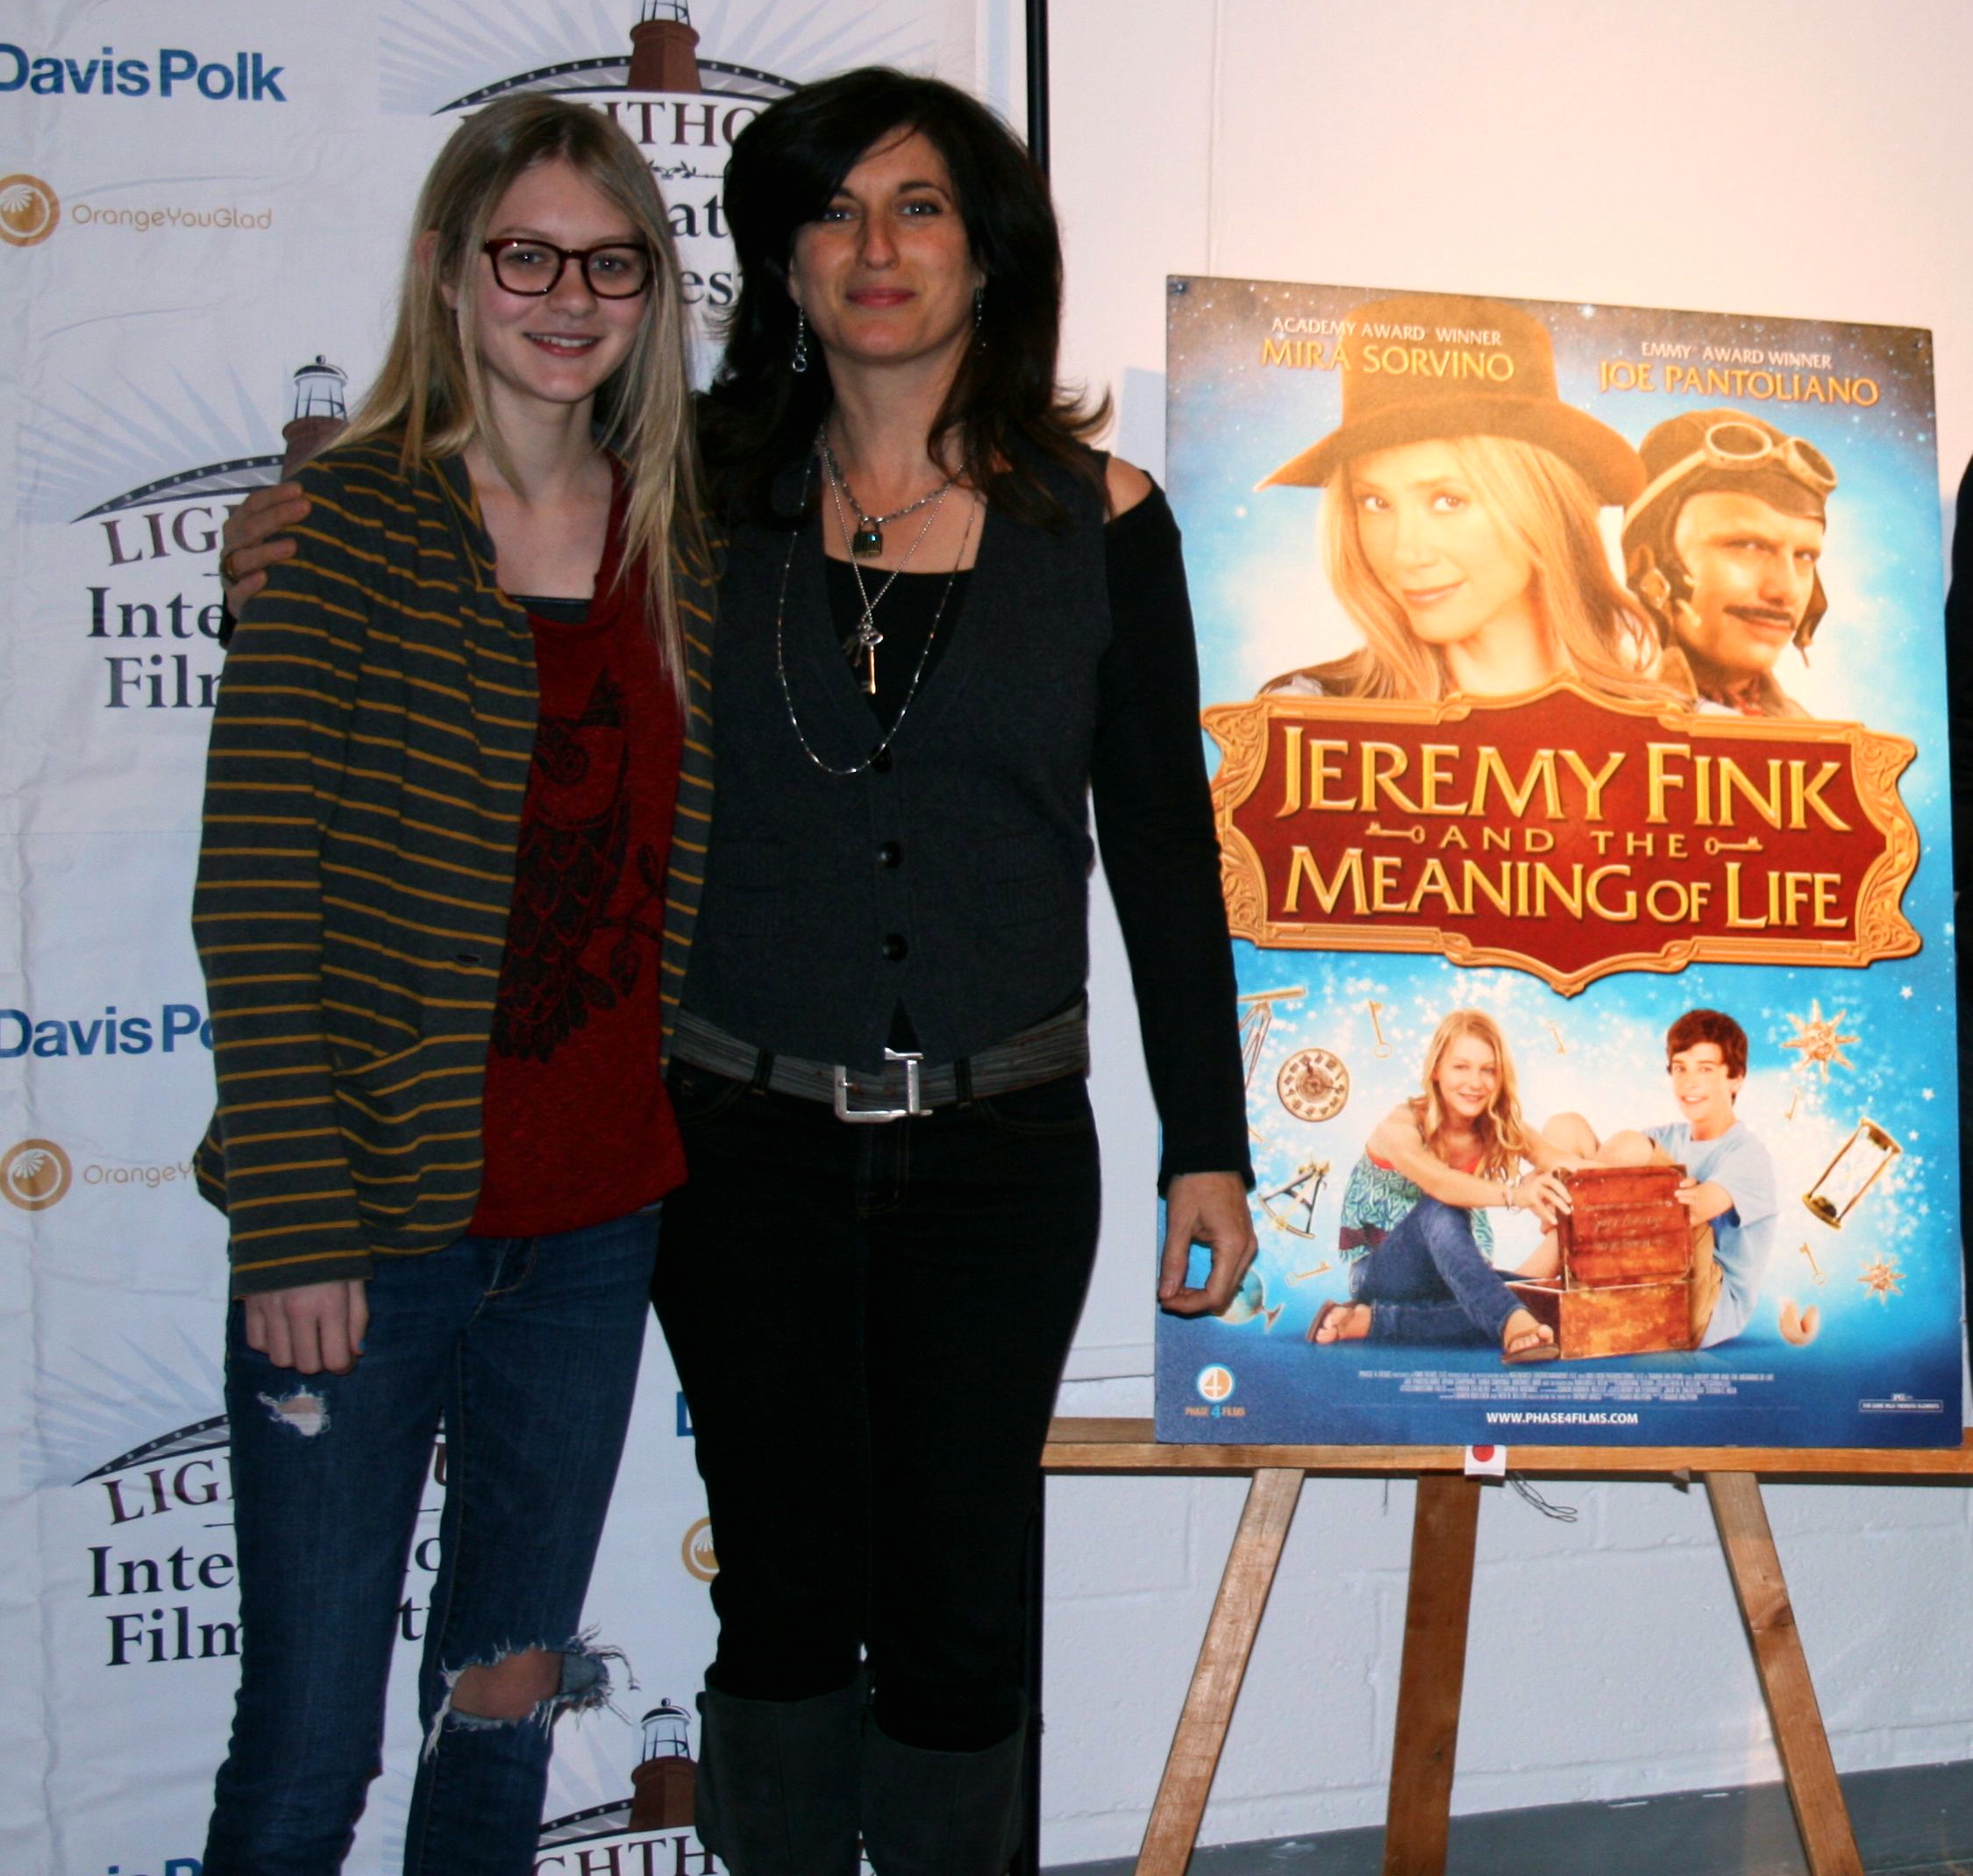 JEREMY FINK AND THE MEANING OF LIFE at the Lighthouse International Film Festival in Long Beach Island, NJ w/Tamar Halpern